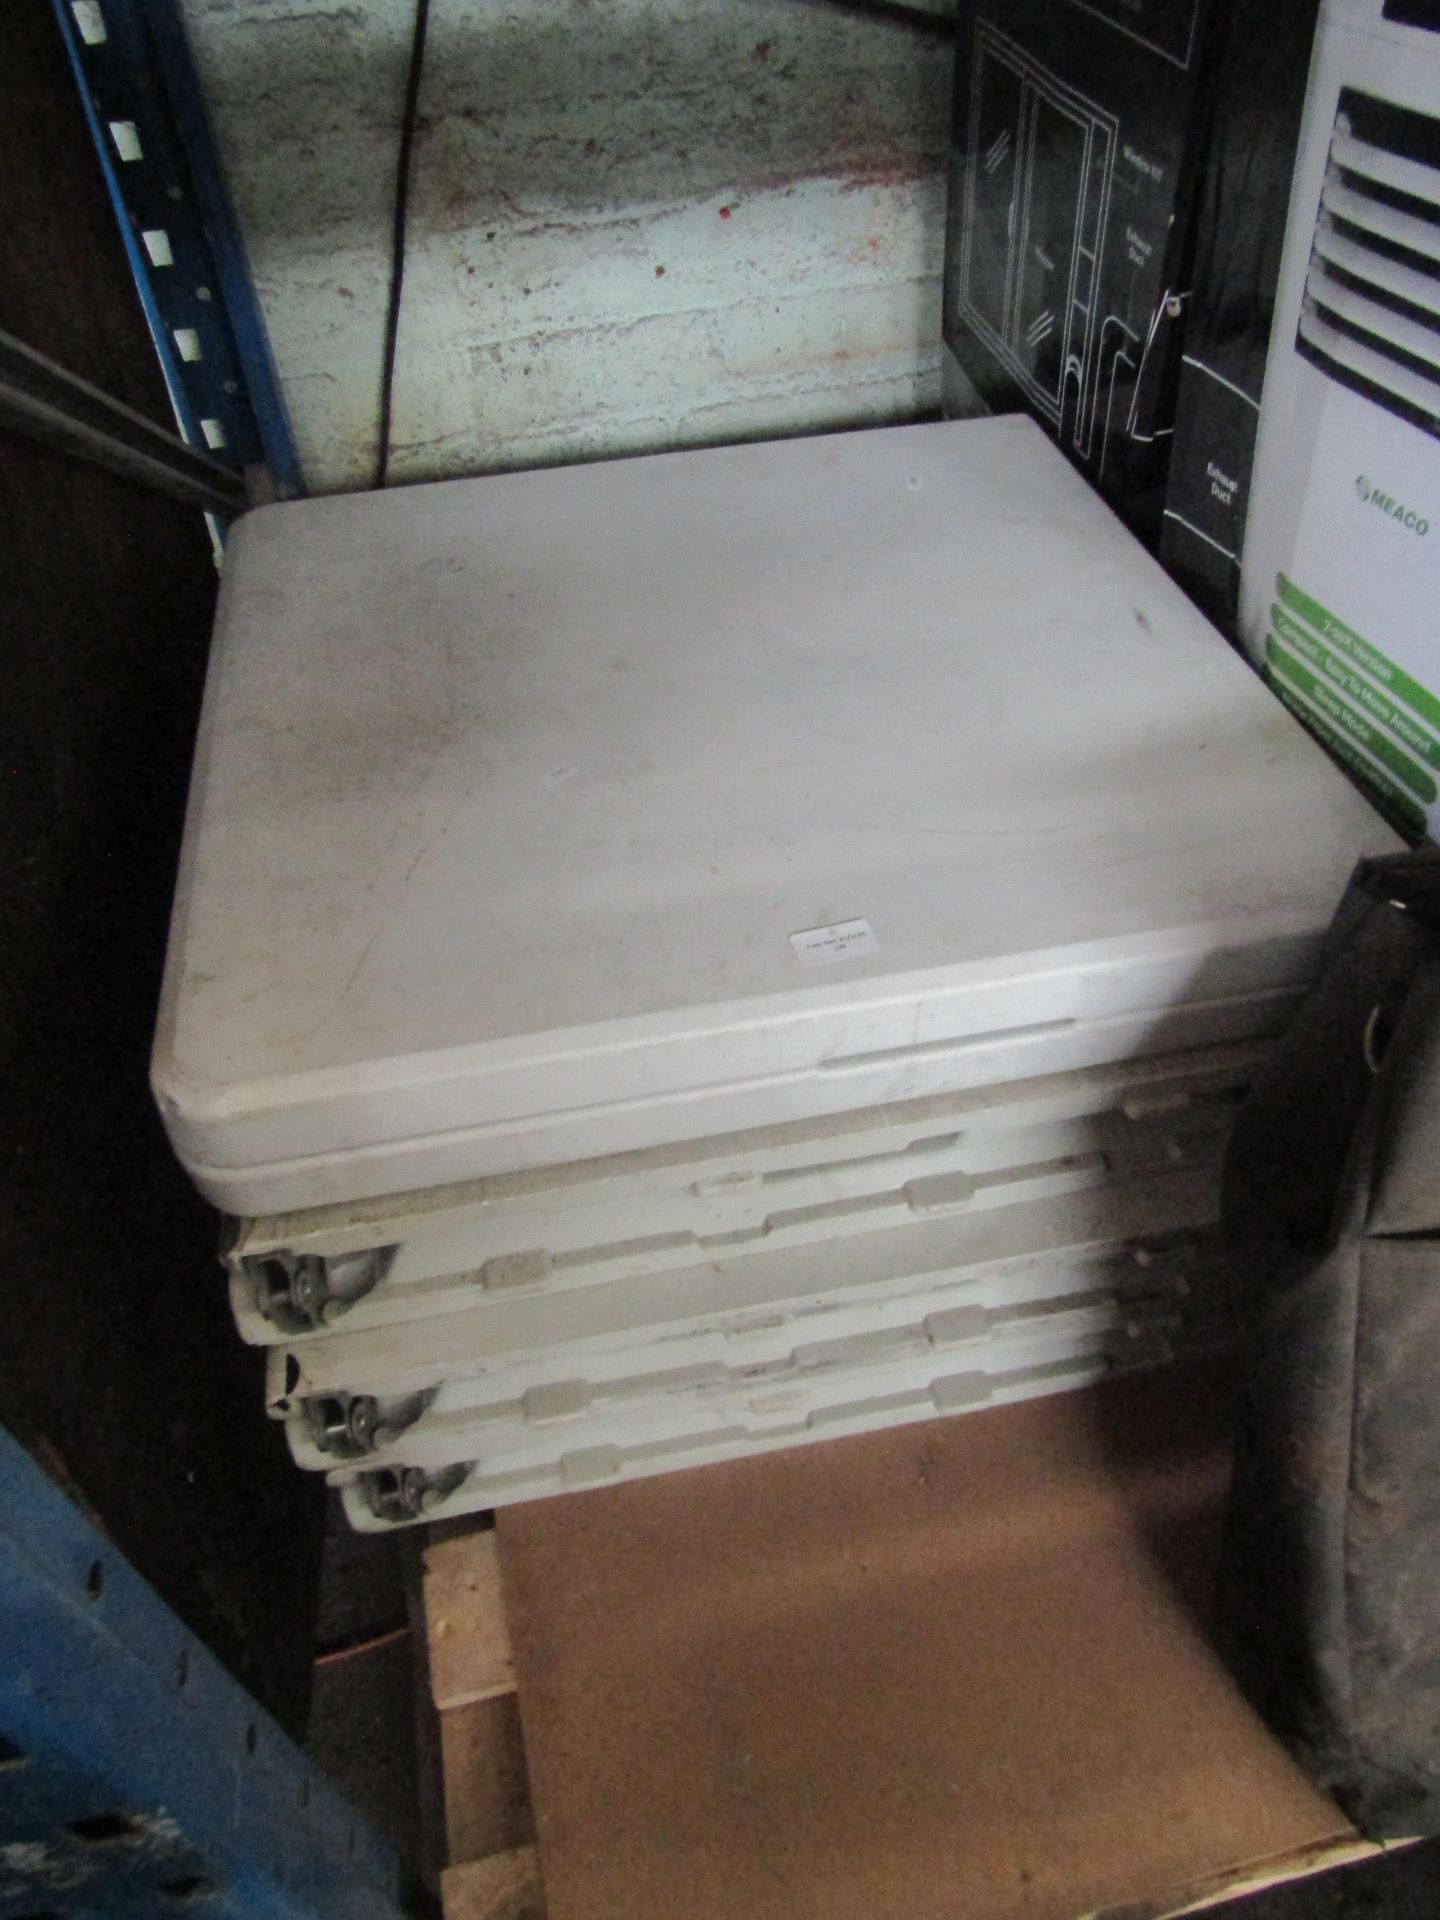 4x Folding Heavy Duty Plastic Tables, All Look To Have Bits Of Damage To The Plastic, Mainly On